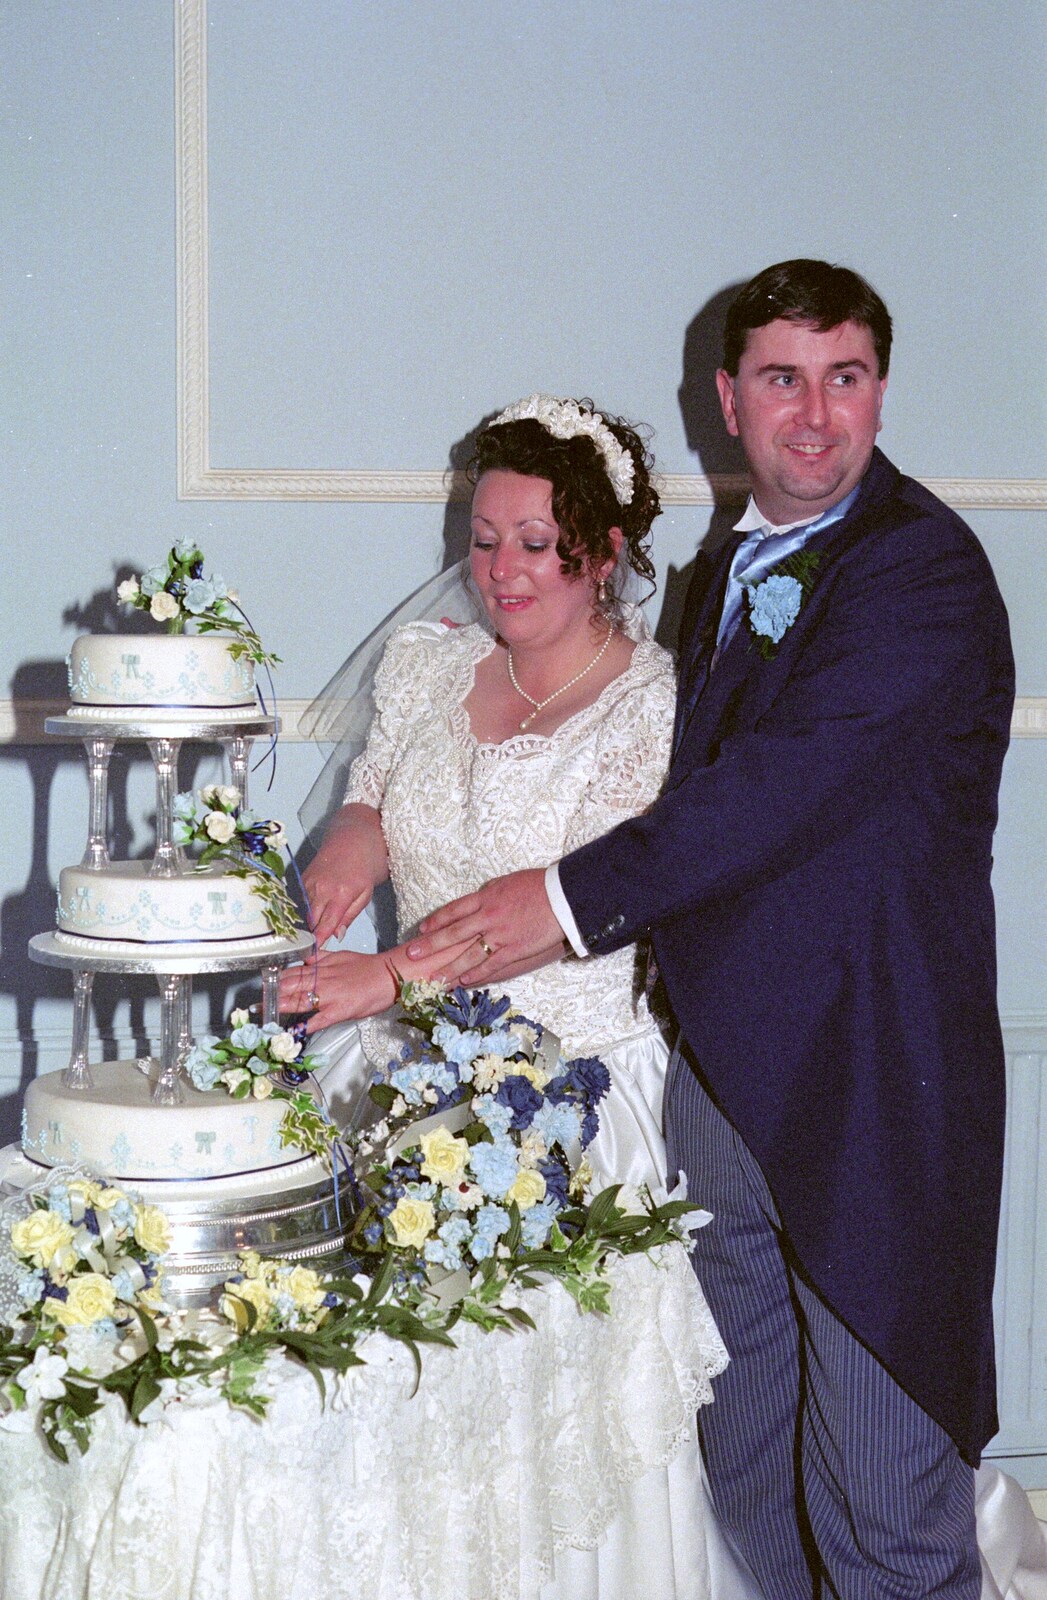 Riki's Wedding, Treboeth, Swansea - 7th May 1996: Riki and his missus cut the cake